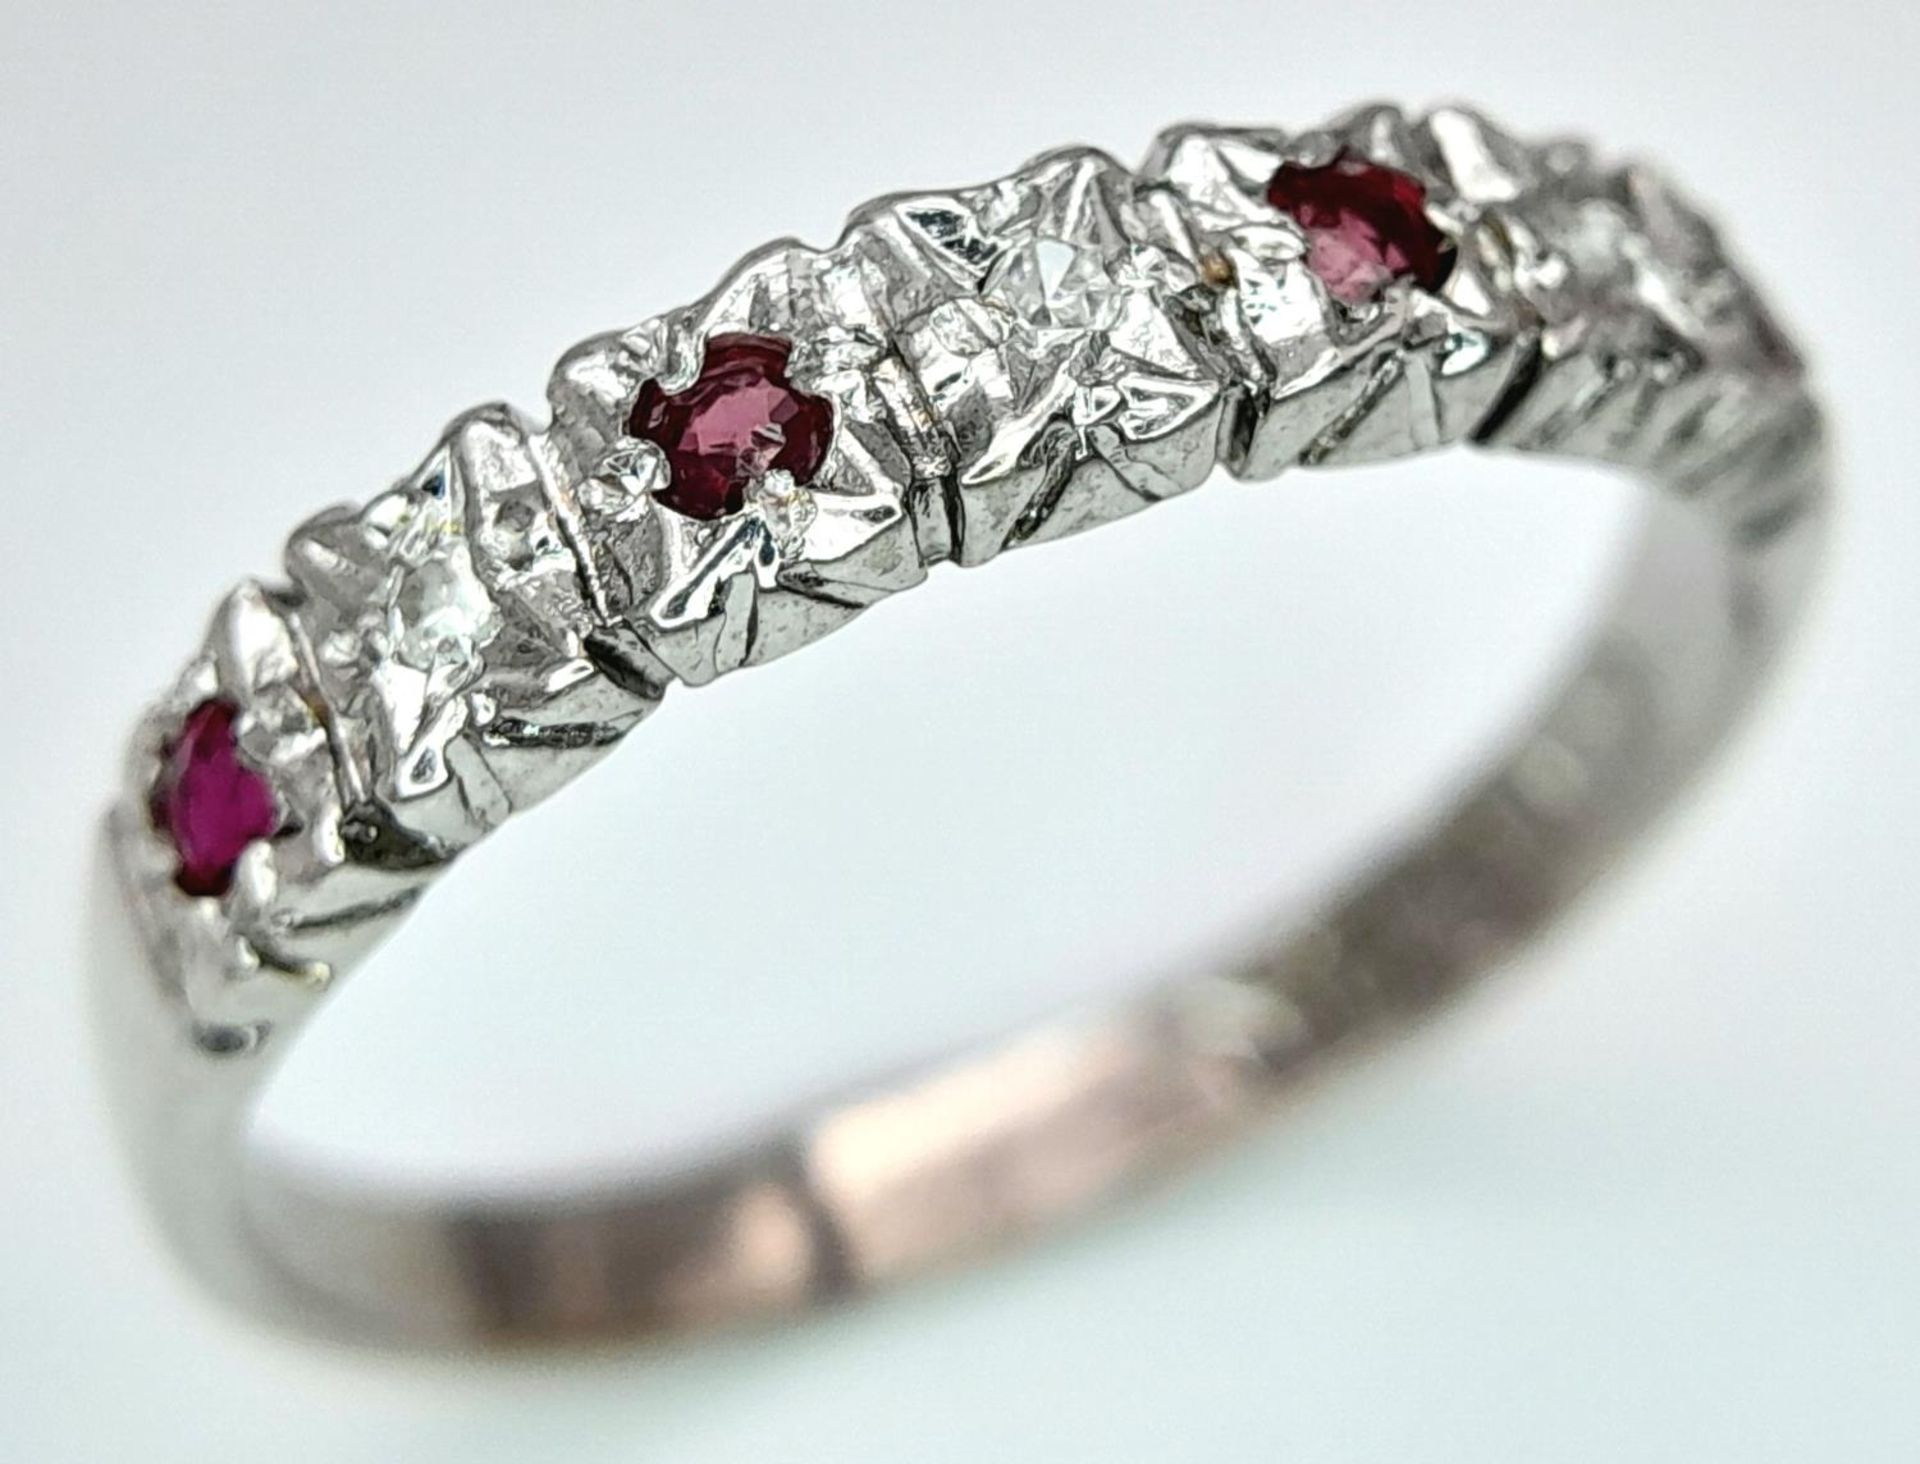 A 9K WHITE GOLD DIAMOND & RUBY BAND RING 1.8G SIZE N 1/2. ref: SPAS 9014 - Image 2 of 5